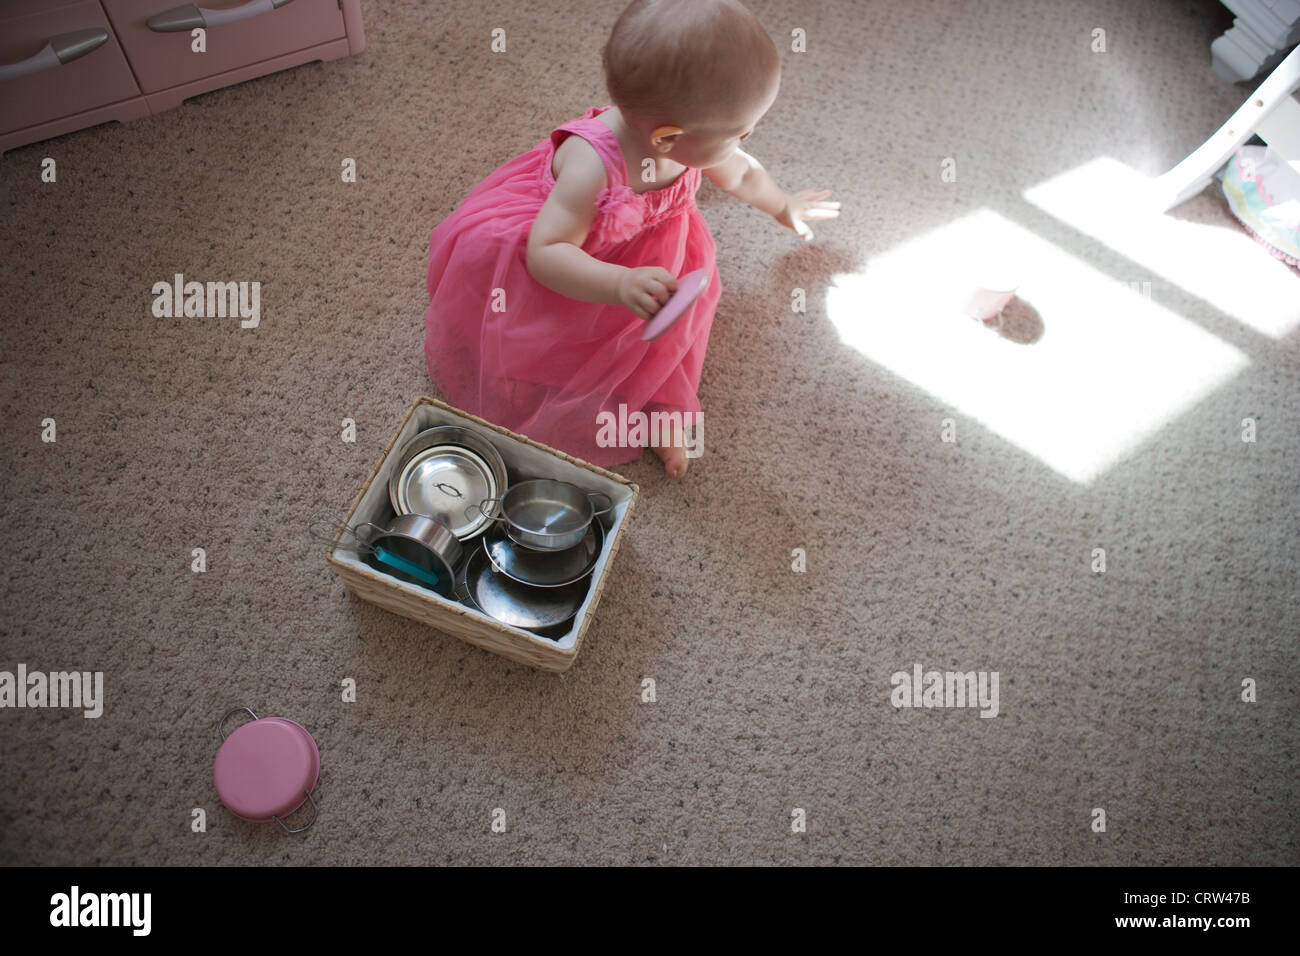 One year old girl plays with toy pots and pans and notices an object in light. Stock Photo